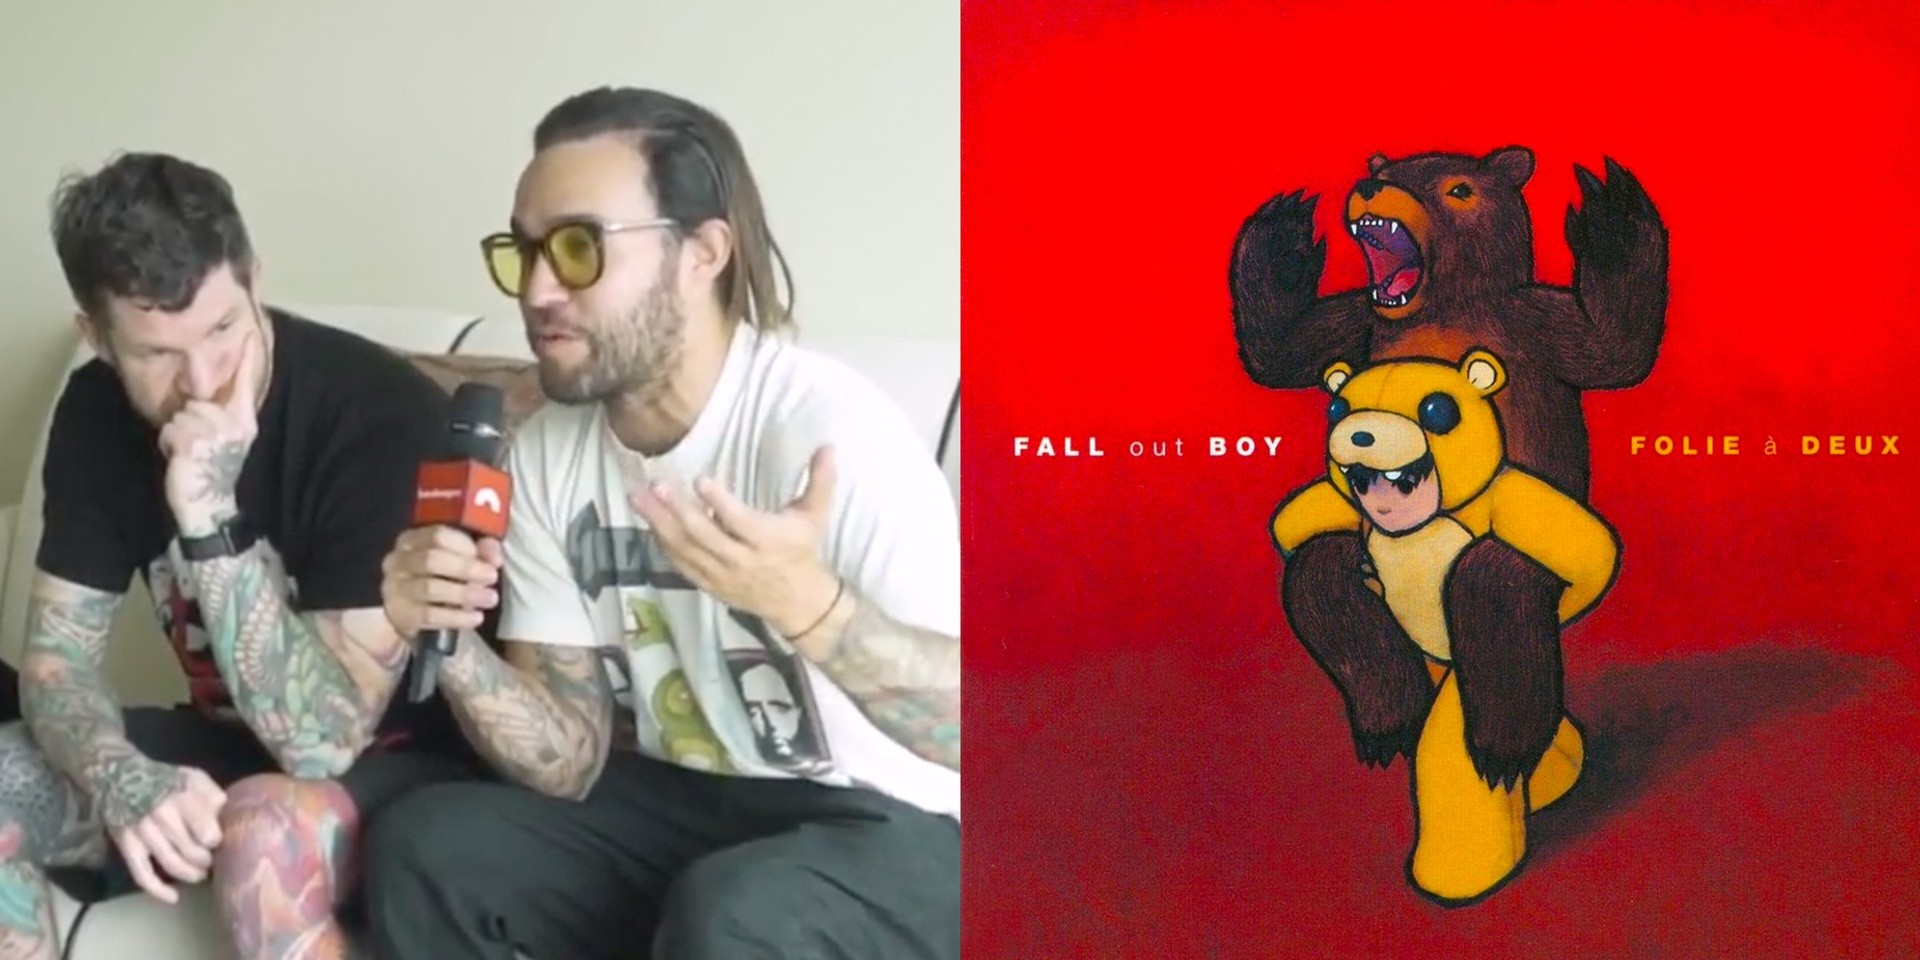 Pete and Andy of Fall Out Boy discuss their album Folie à Deux, which turns 10 this year – watch